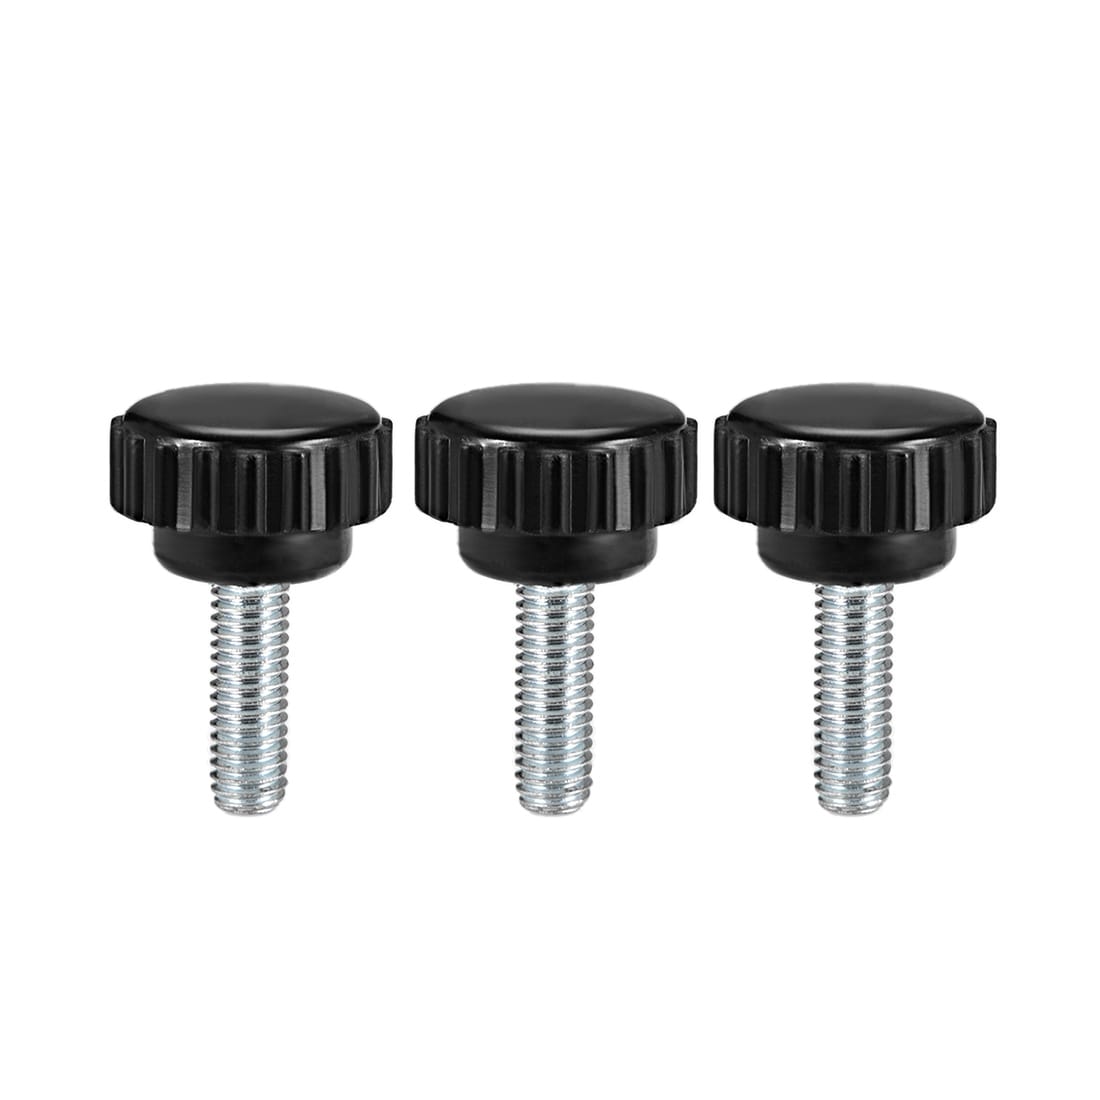 M6 x 15 mm Male Thread Knurled Clamping knobs Grip Butterfly Screw in Type 3 Parts 